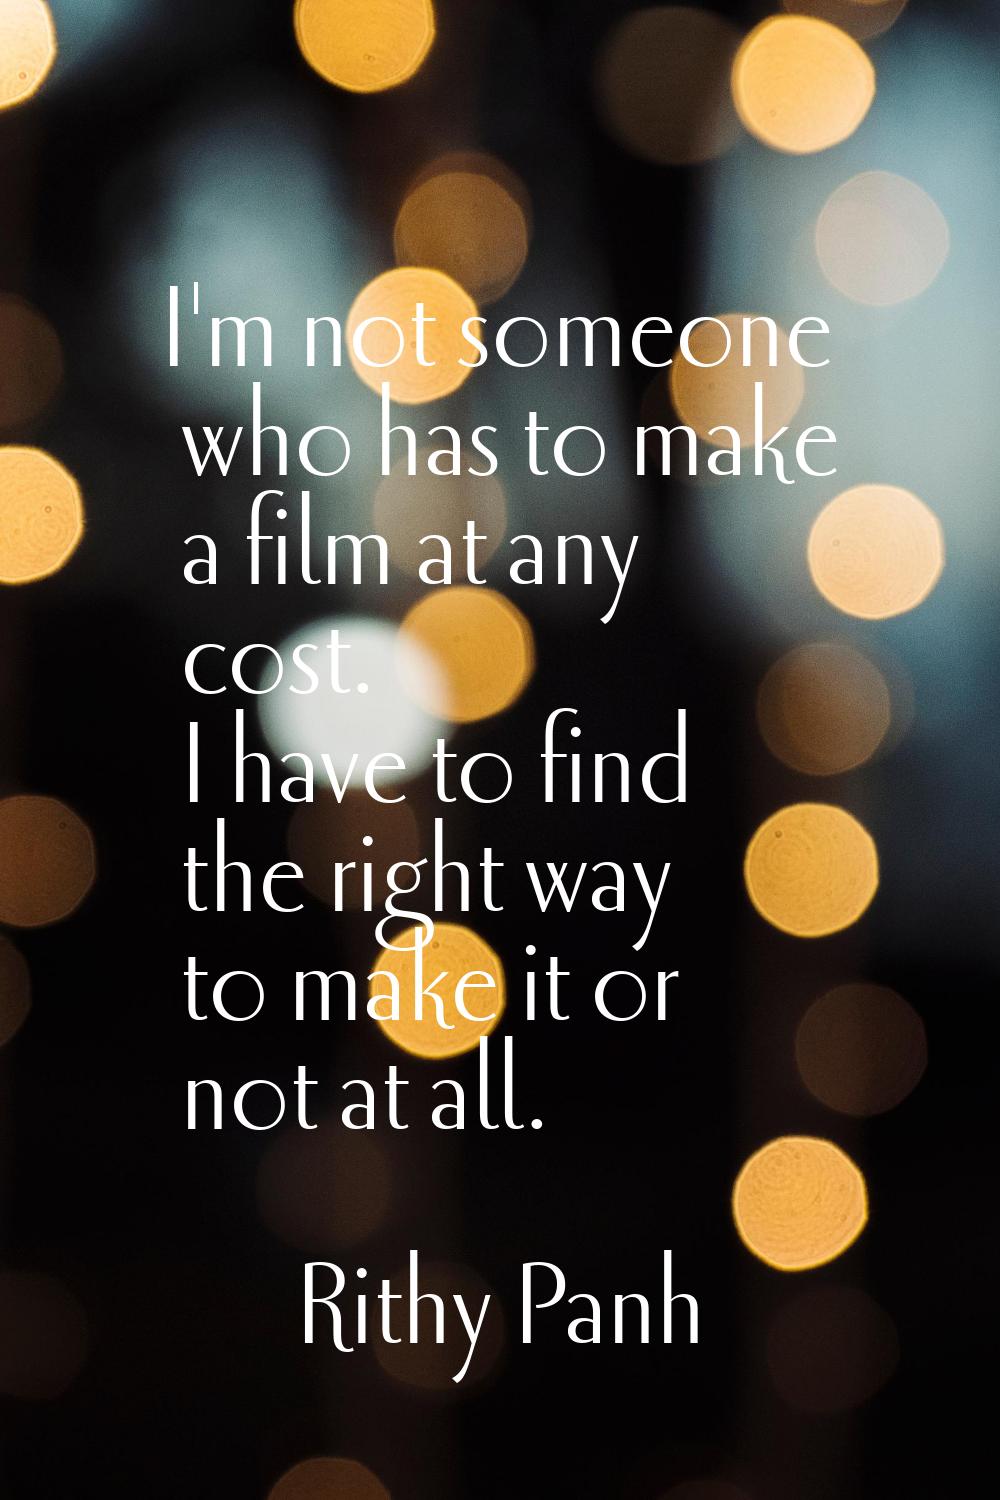 I'm not someone who has to make a film at any cost. I have to find the right way to make it or not 